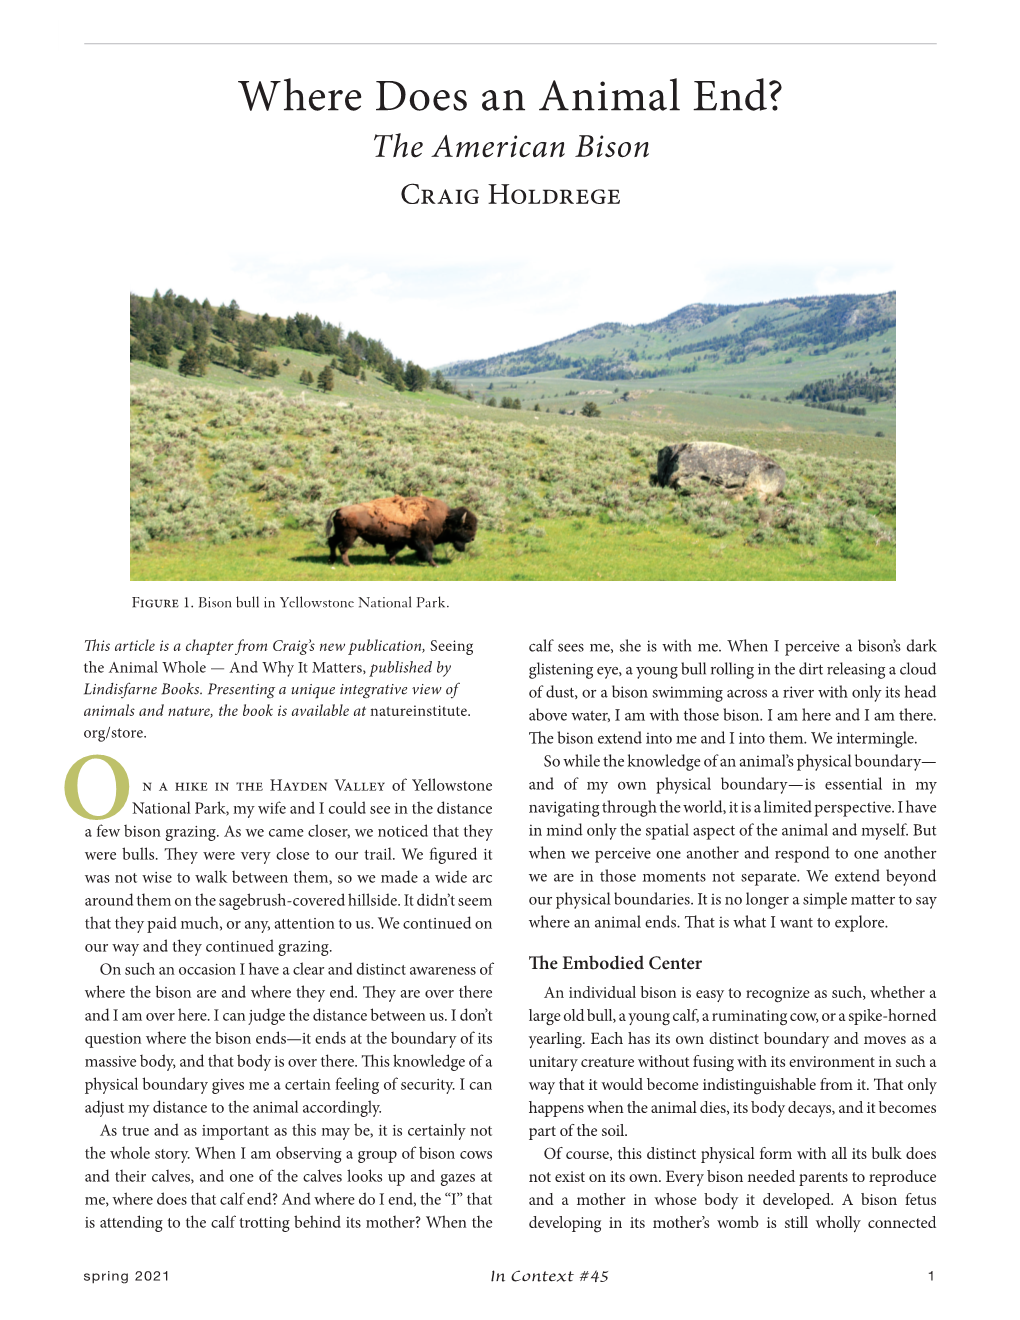 Where Does an Animal End? the American Bison Craig Holdrege